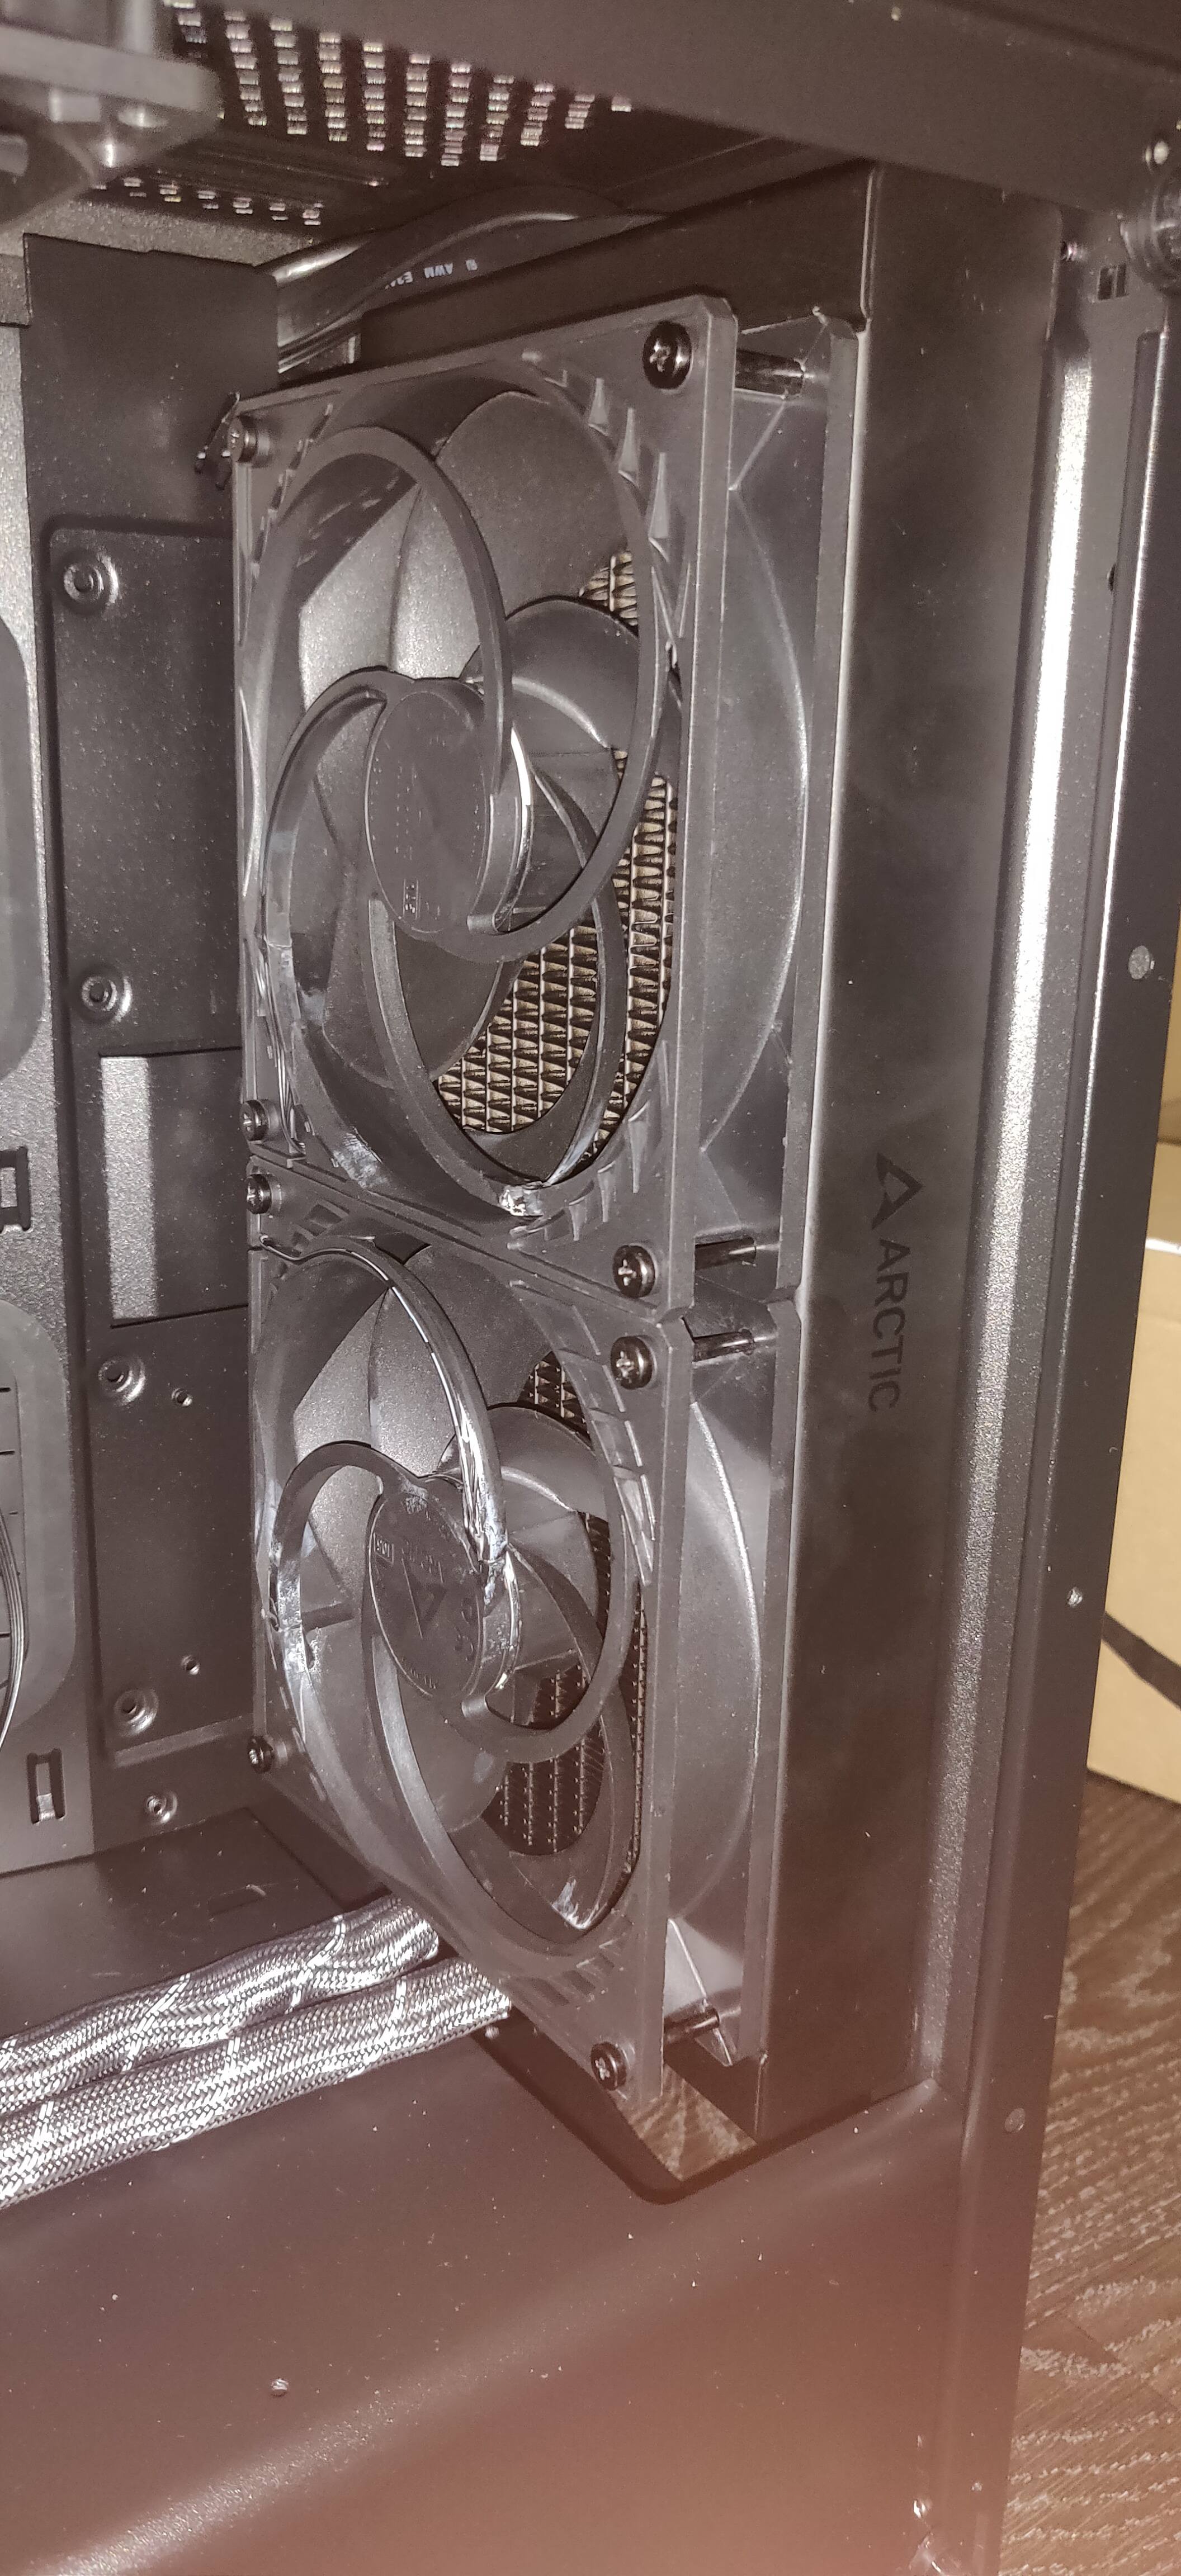 How can I keep my AIO tubes from hitting my top fan? : r/Corsair